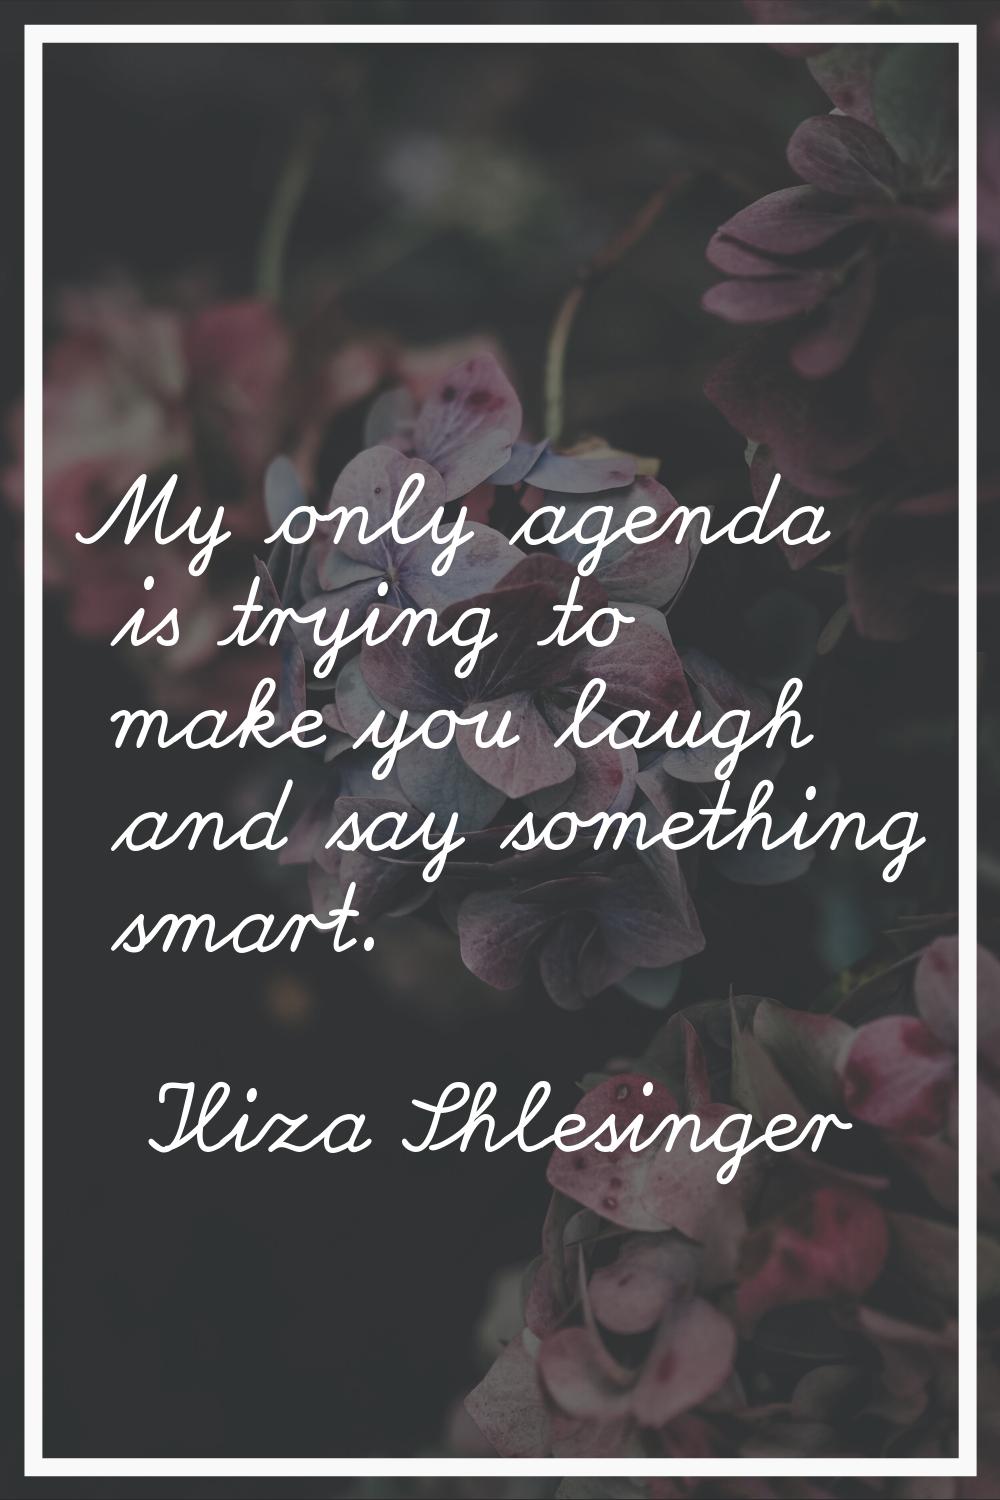 My only agenda is trying to make you laugh and say something smart.